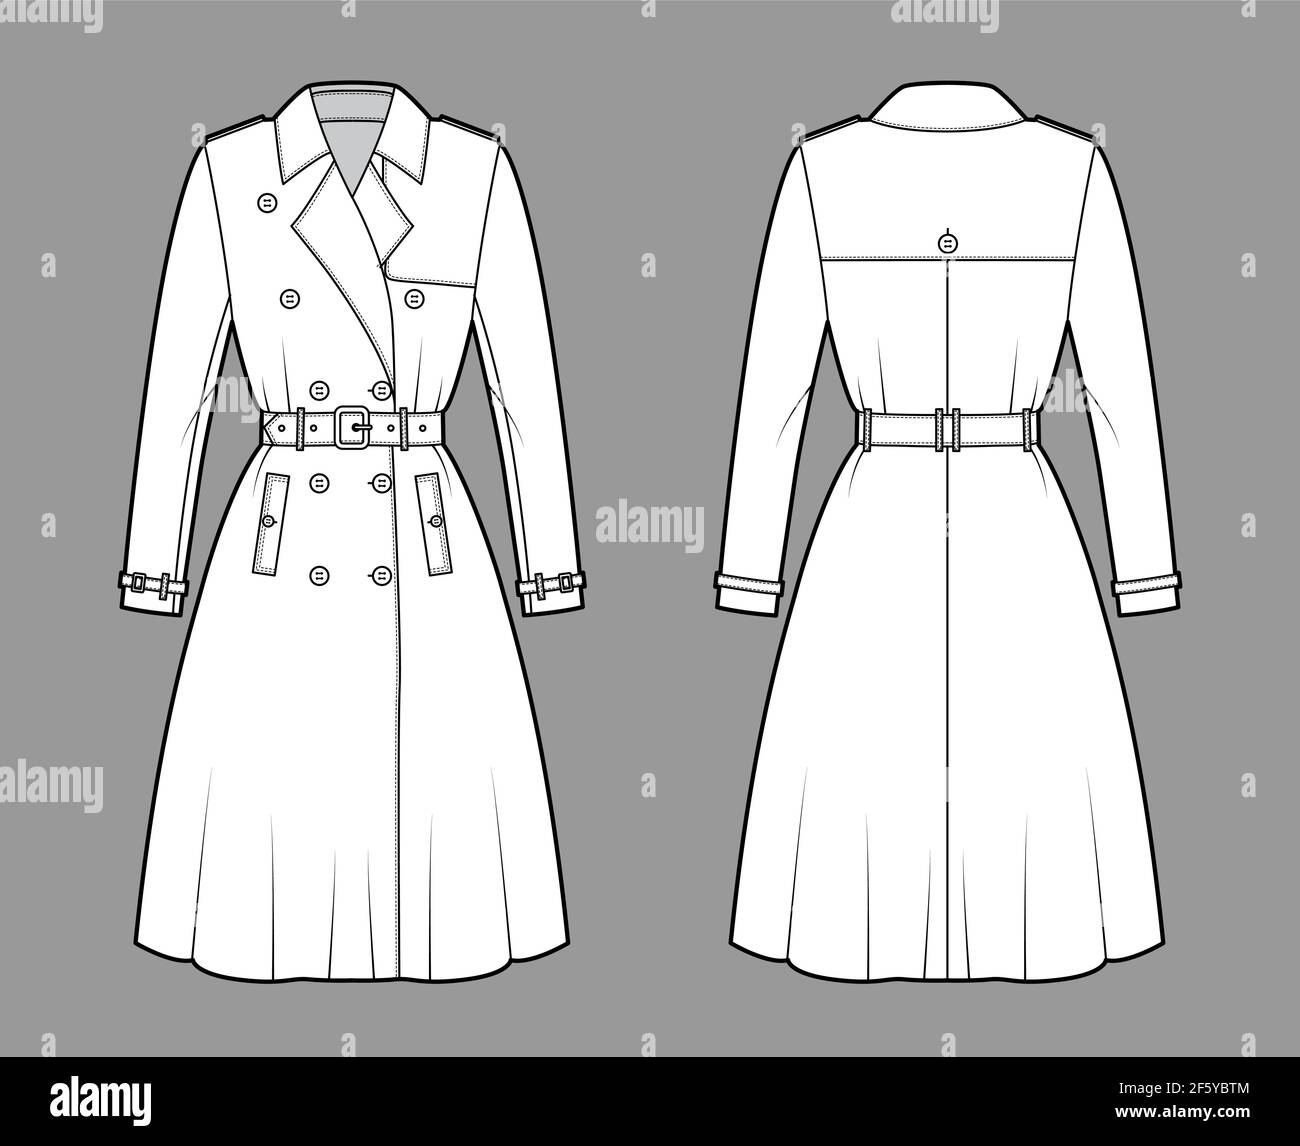 Full Trench coat technical fashion illustration with belt, napoleon wide lapel collar, knee length, storm flap. Flat jacket template front, back, white color style. Women, men, unisex top CAD mockup Stock Vector